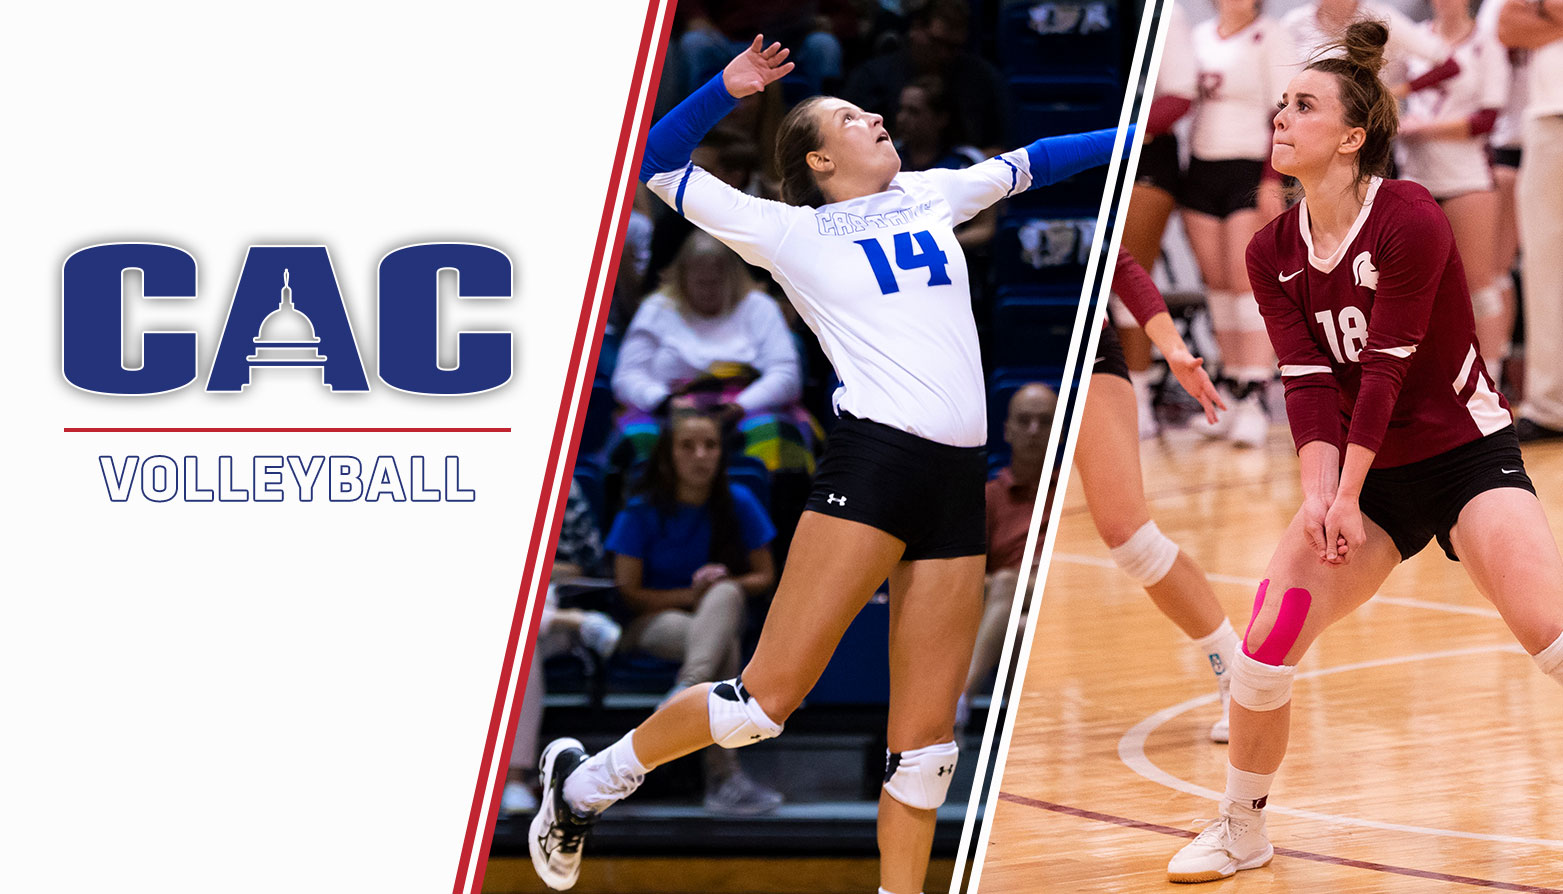 CNU's Crofford, SVU's Knight Earn CAC Volleyball Player of the Week Honors